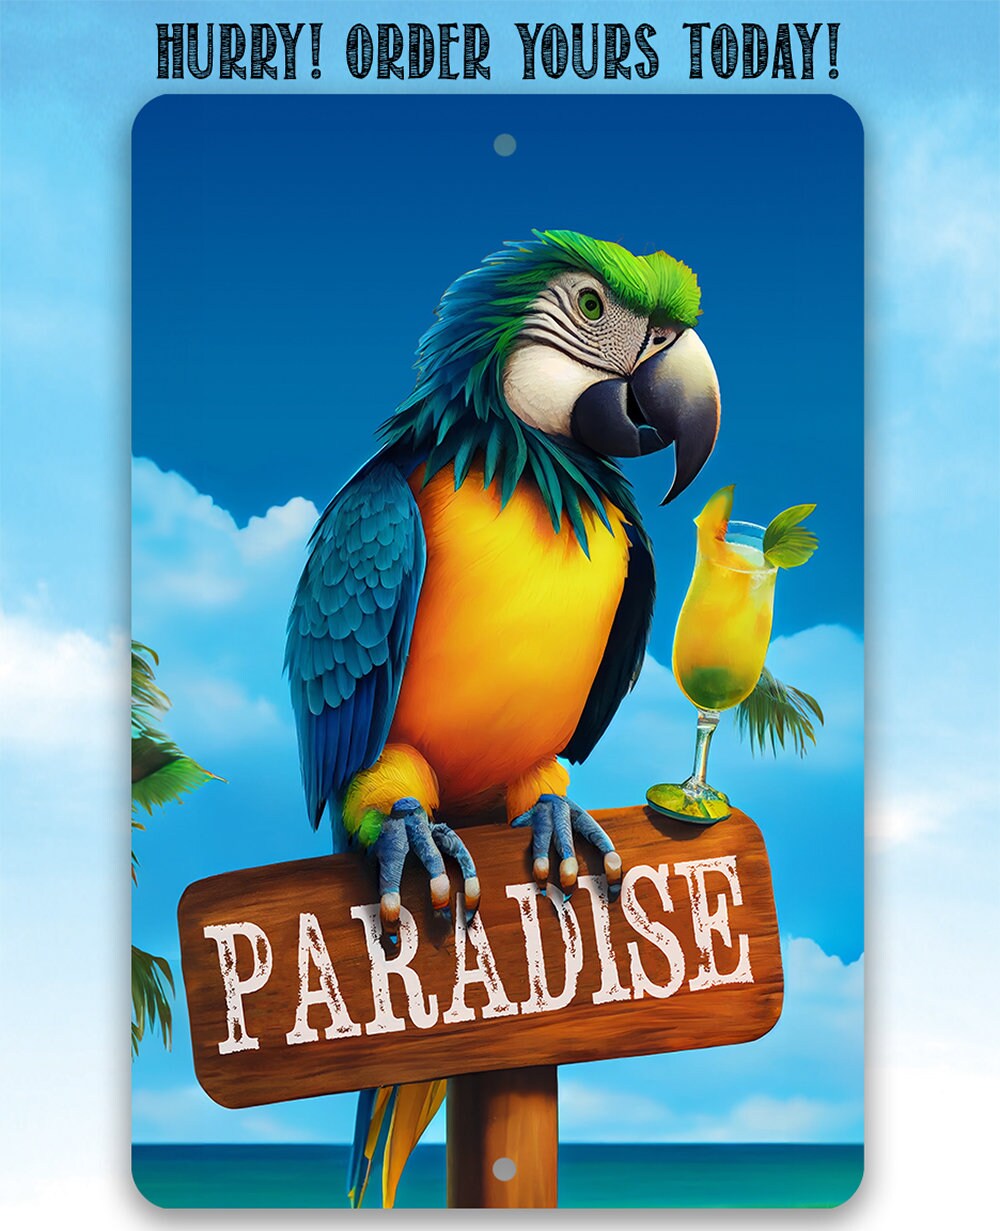 Metal Sign - Paradise Parrot - Durable Tin - 8"x12" / 12"x18" Use Indoor/Outdoor -Great Gift and Décor for Bar, Patio, Swimming Pool